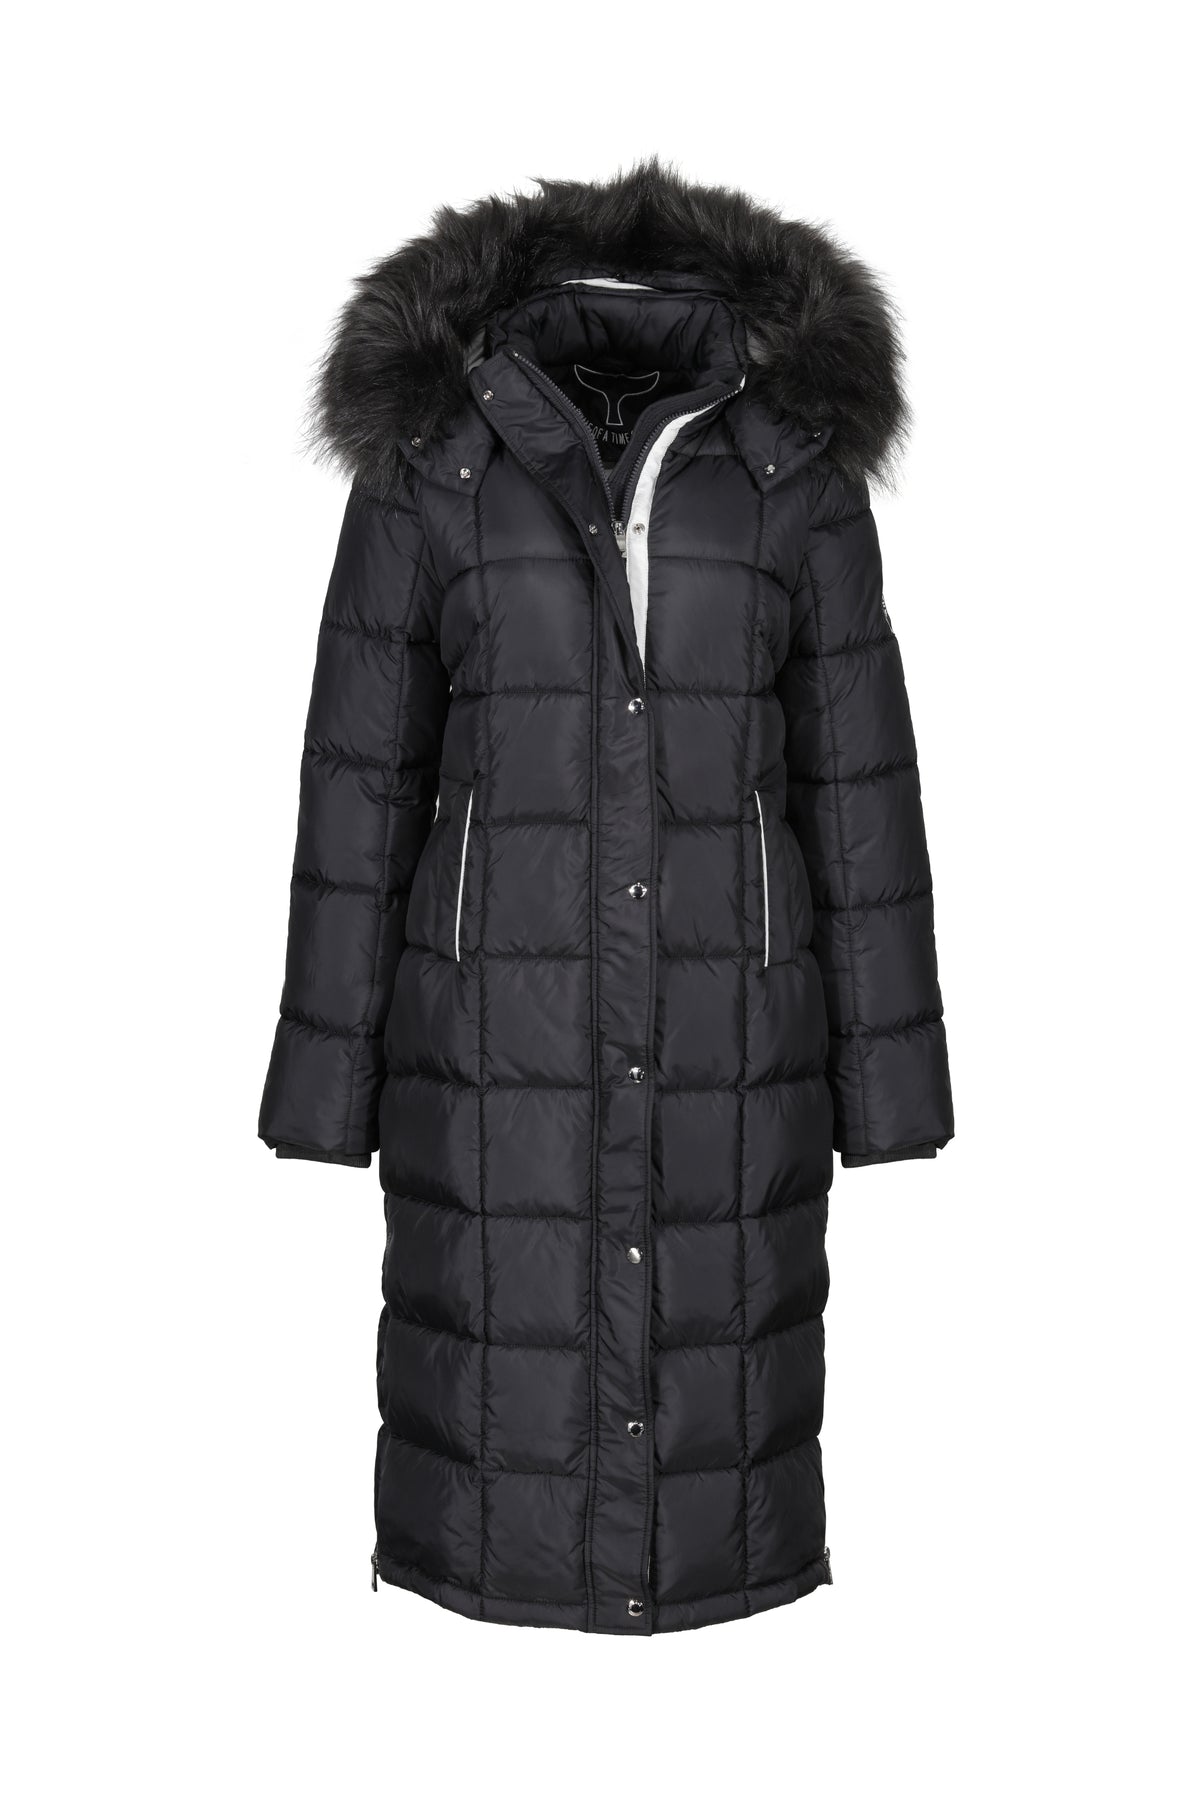 Chatsworth Longline Puffer Coat - Charcoal - Whale Of A Time Clothing